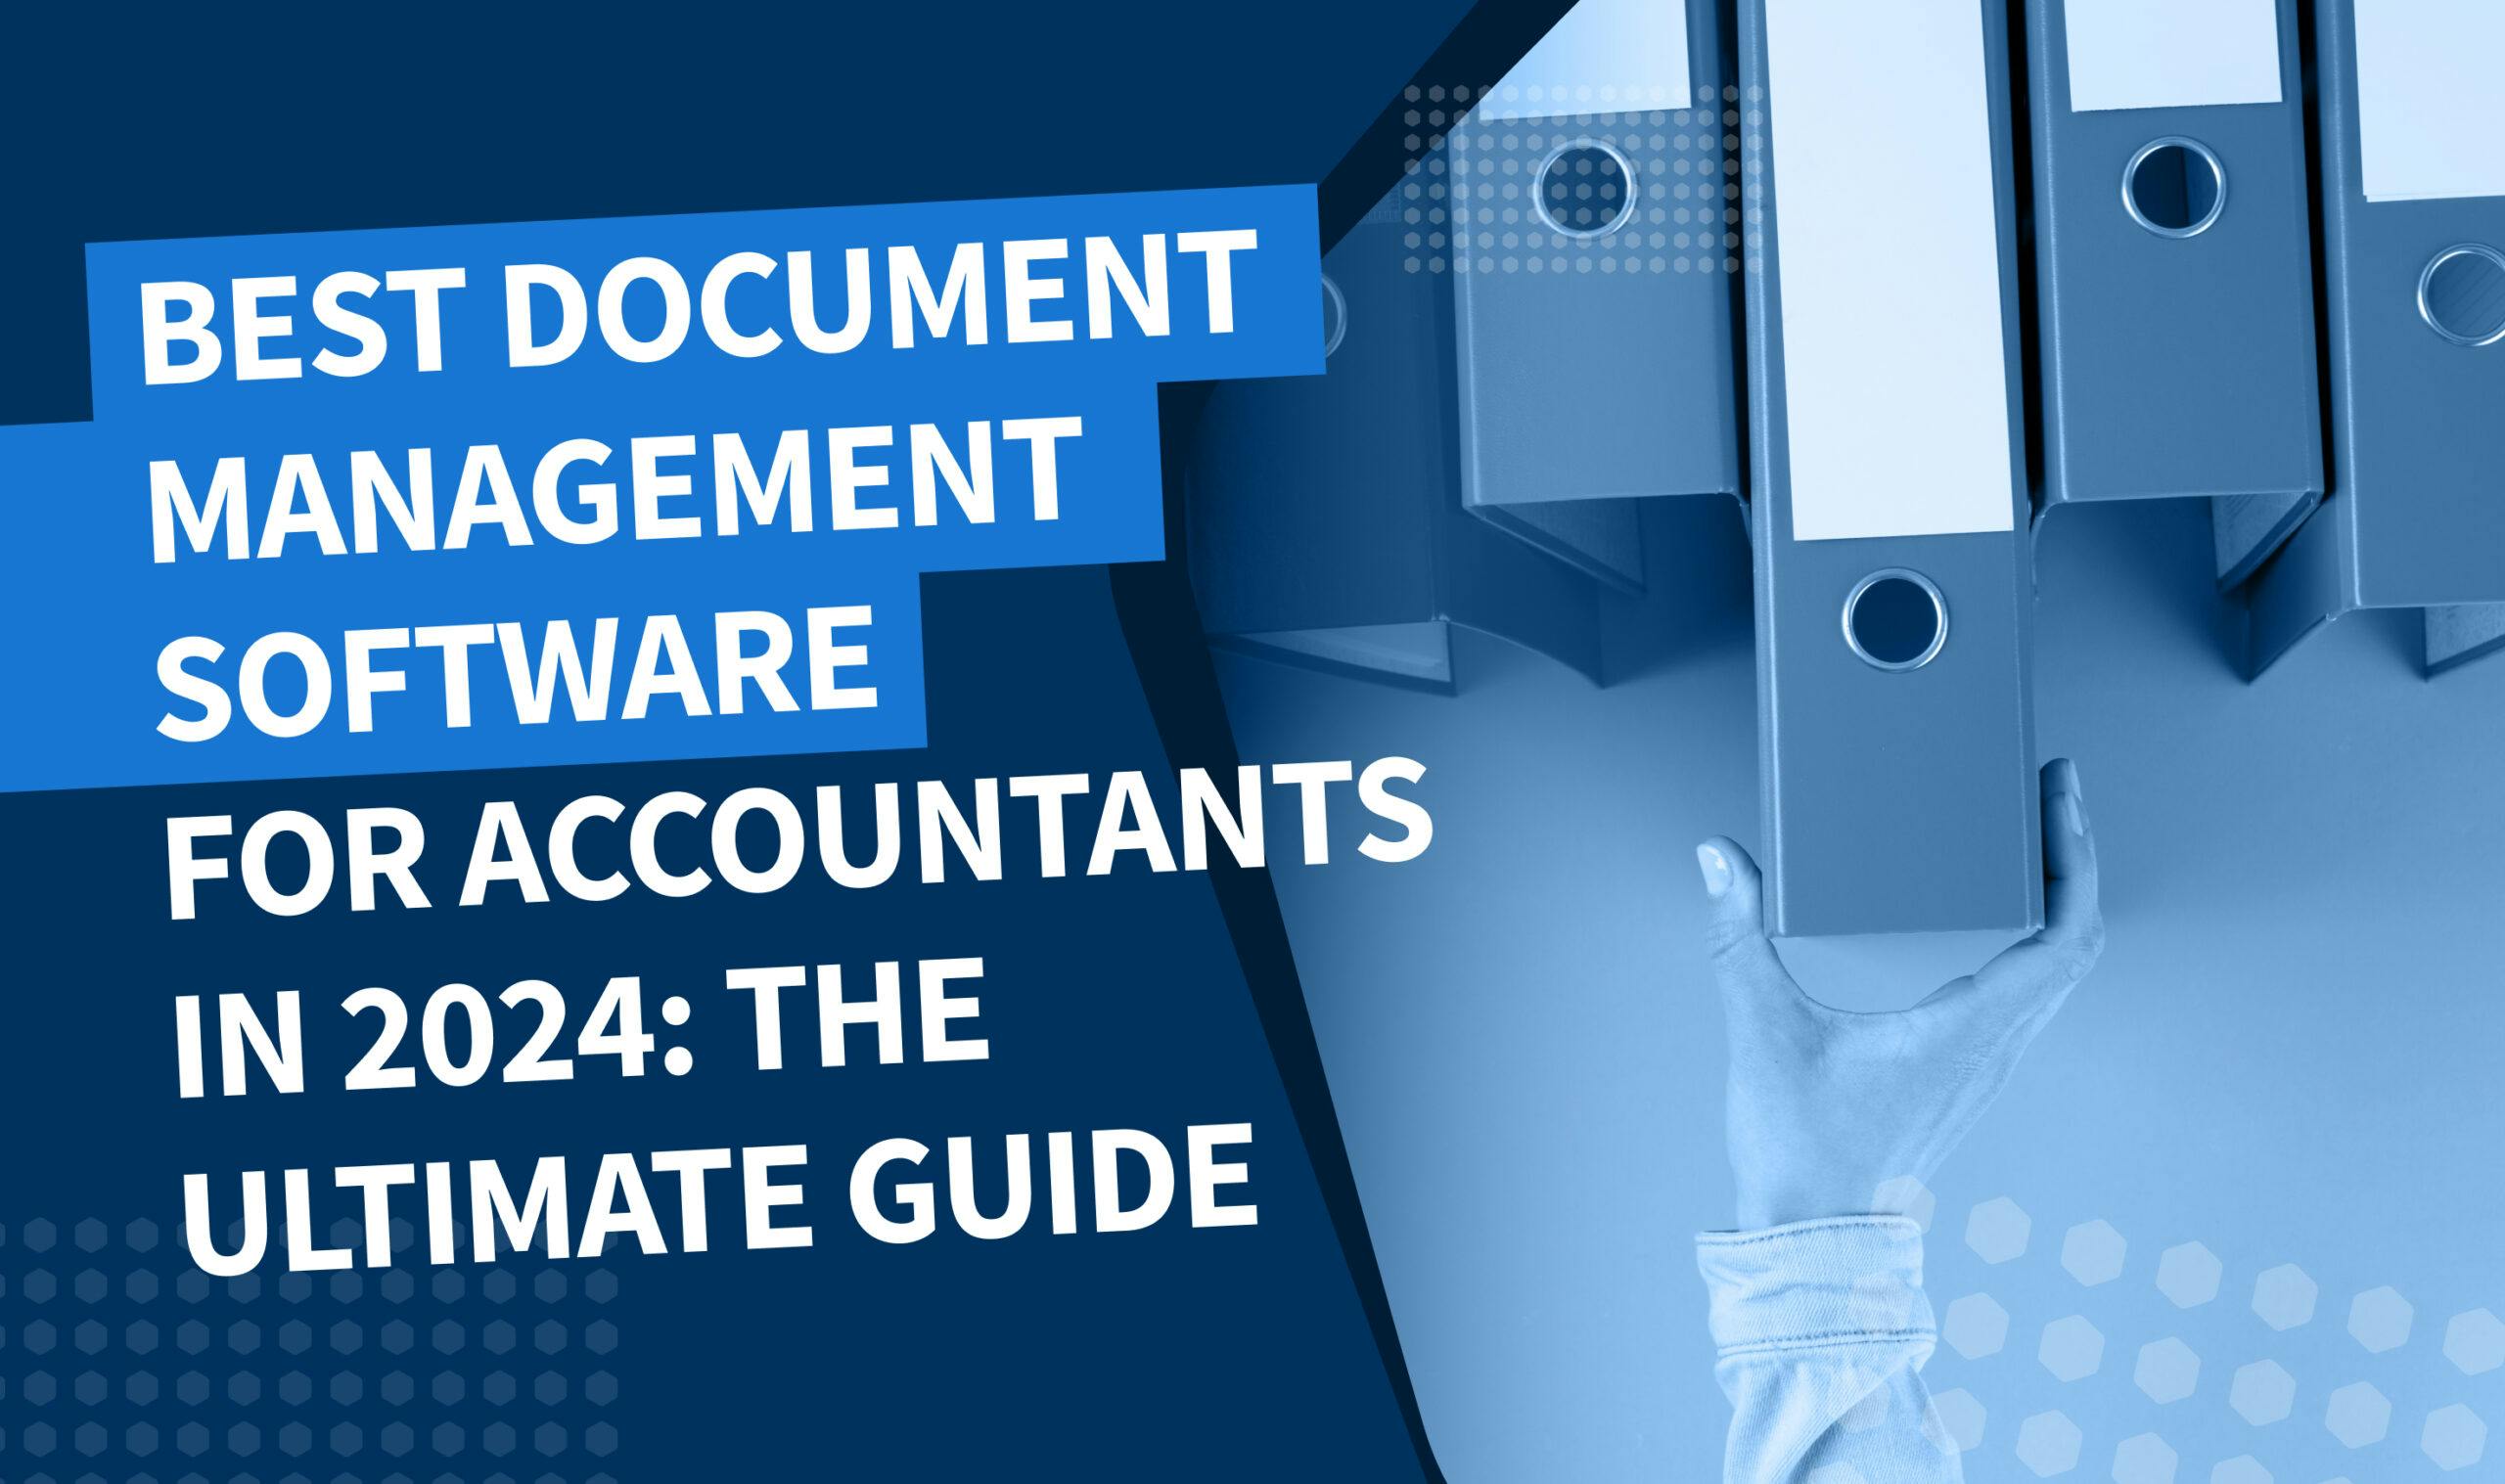 Best document management software for accountants in 2024: the ultimate guide